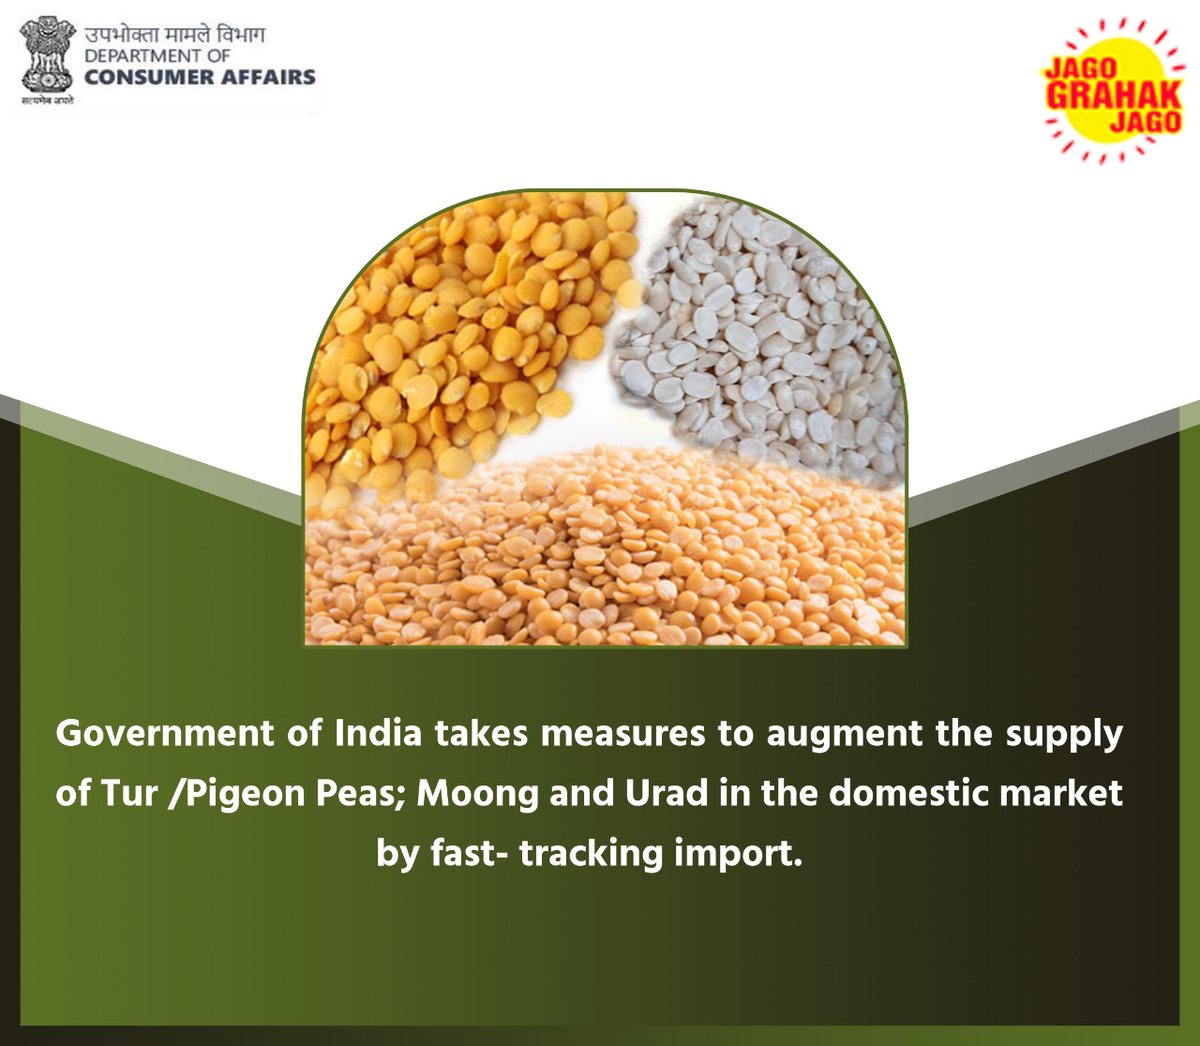 The government of India takes measures to augment the supply of pluses, mentioned below.

#JagoGrahakJago #GOI #Pulses #MoongDal #UradDal #TurDal #consumerprotection #consumerservices